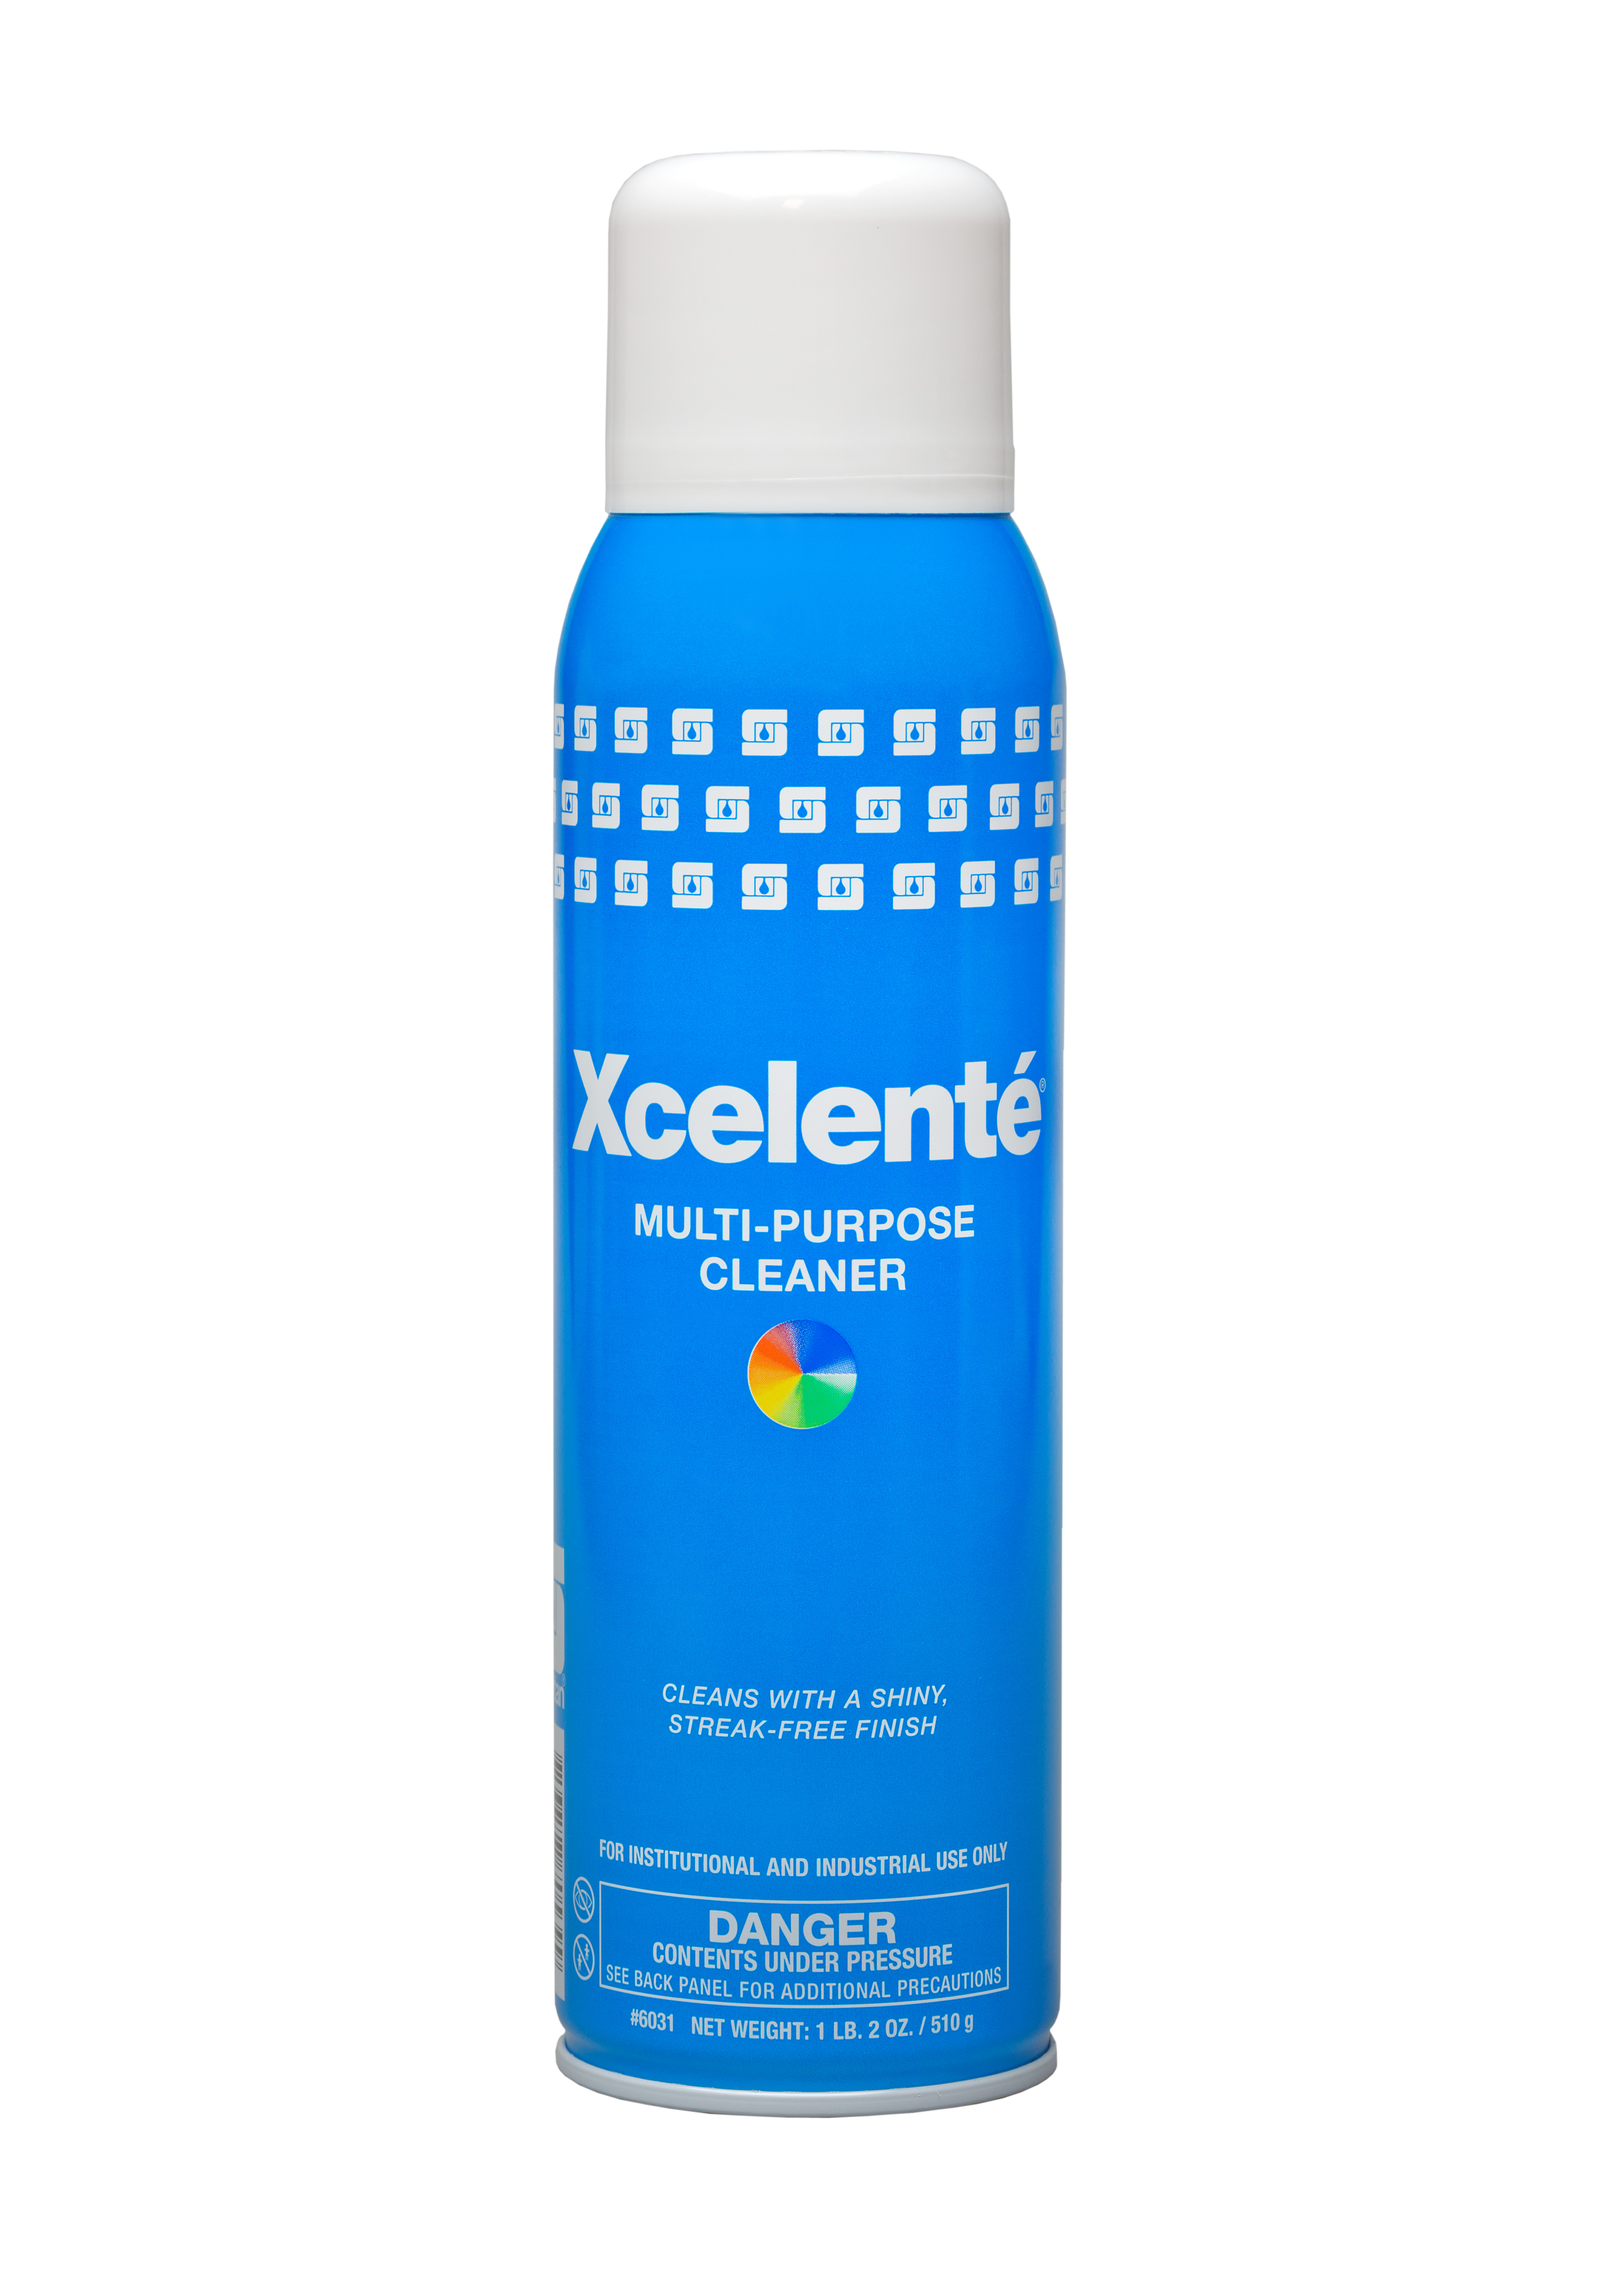 Spartan Chemical Company Xcelente Multi-Purpose Cleaner, 12-20 OZ.CAN